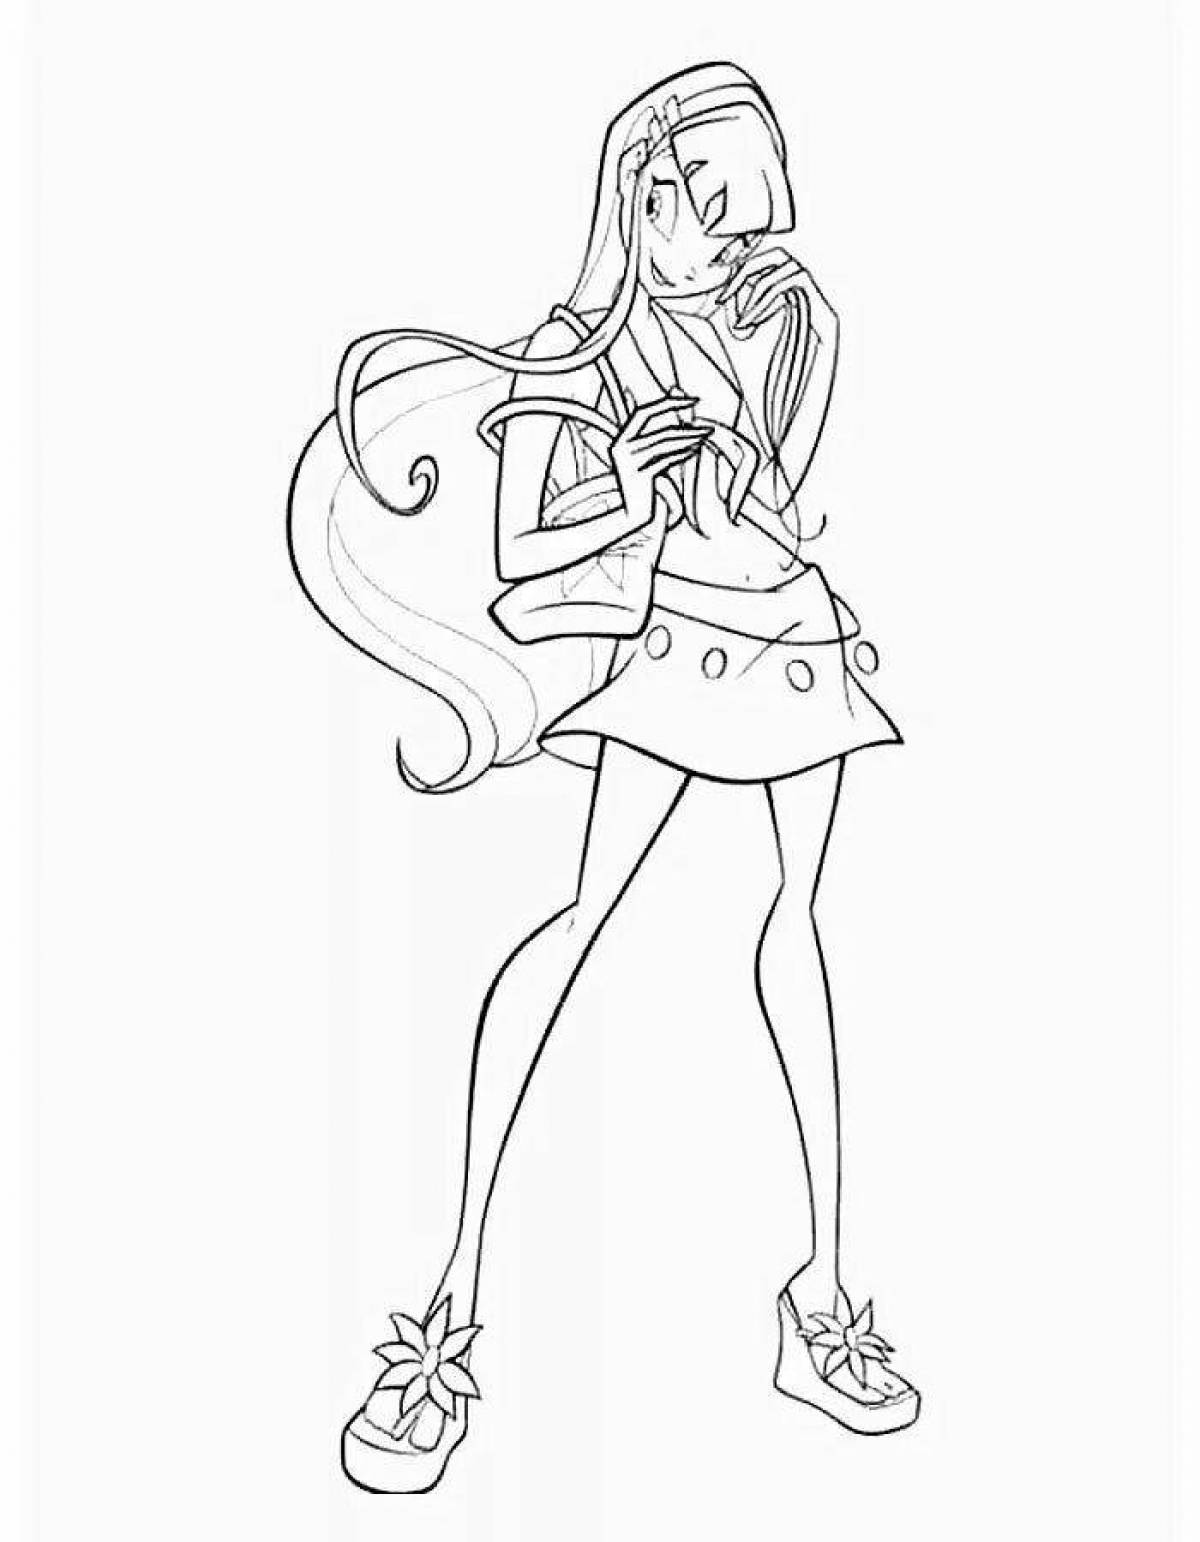 Charming stella winx coloring page